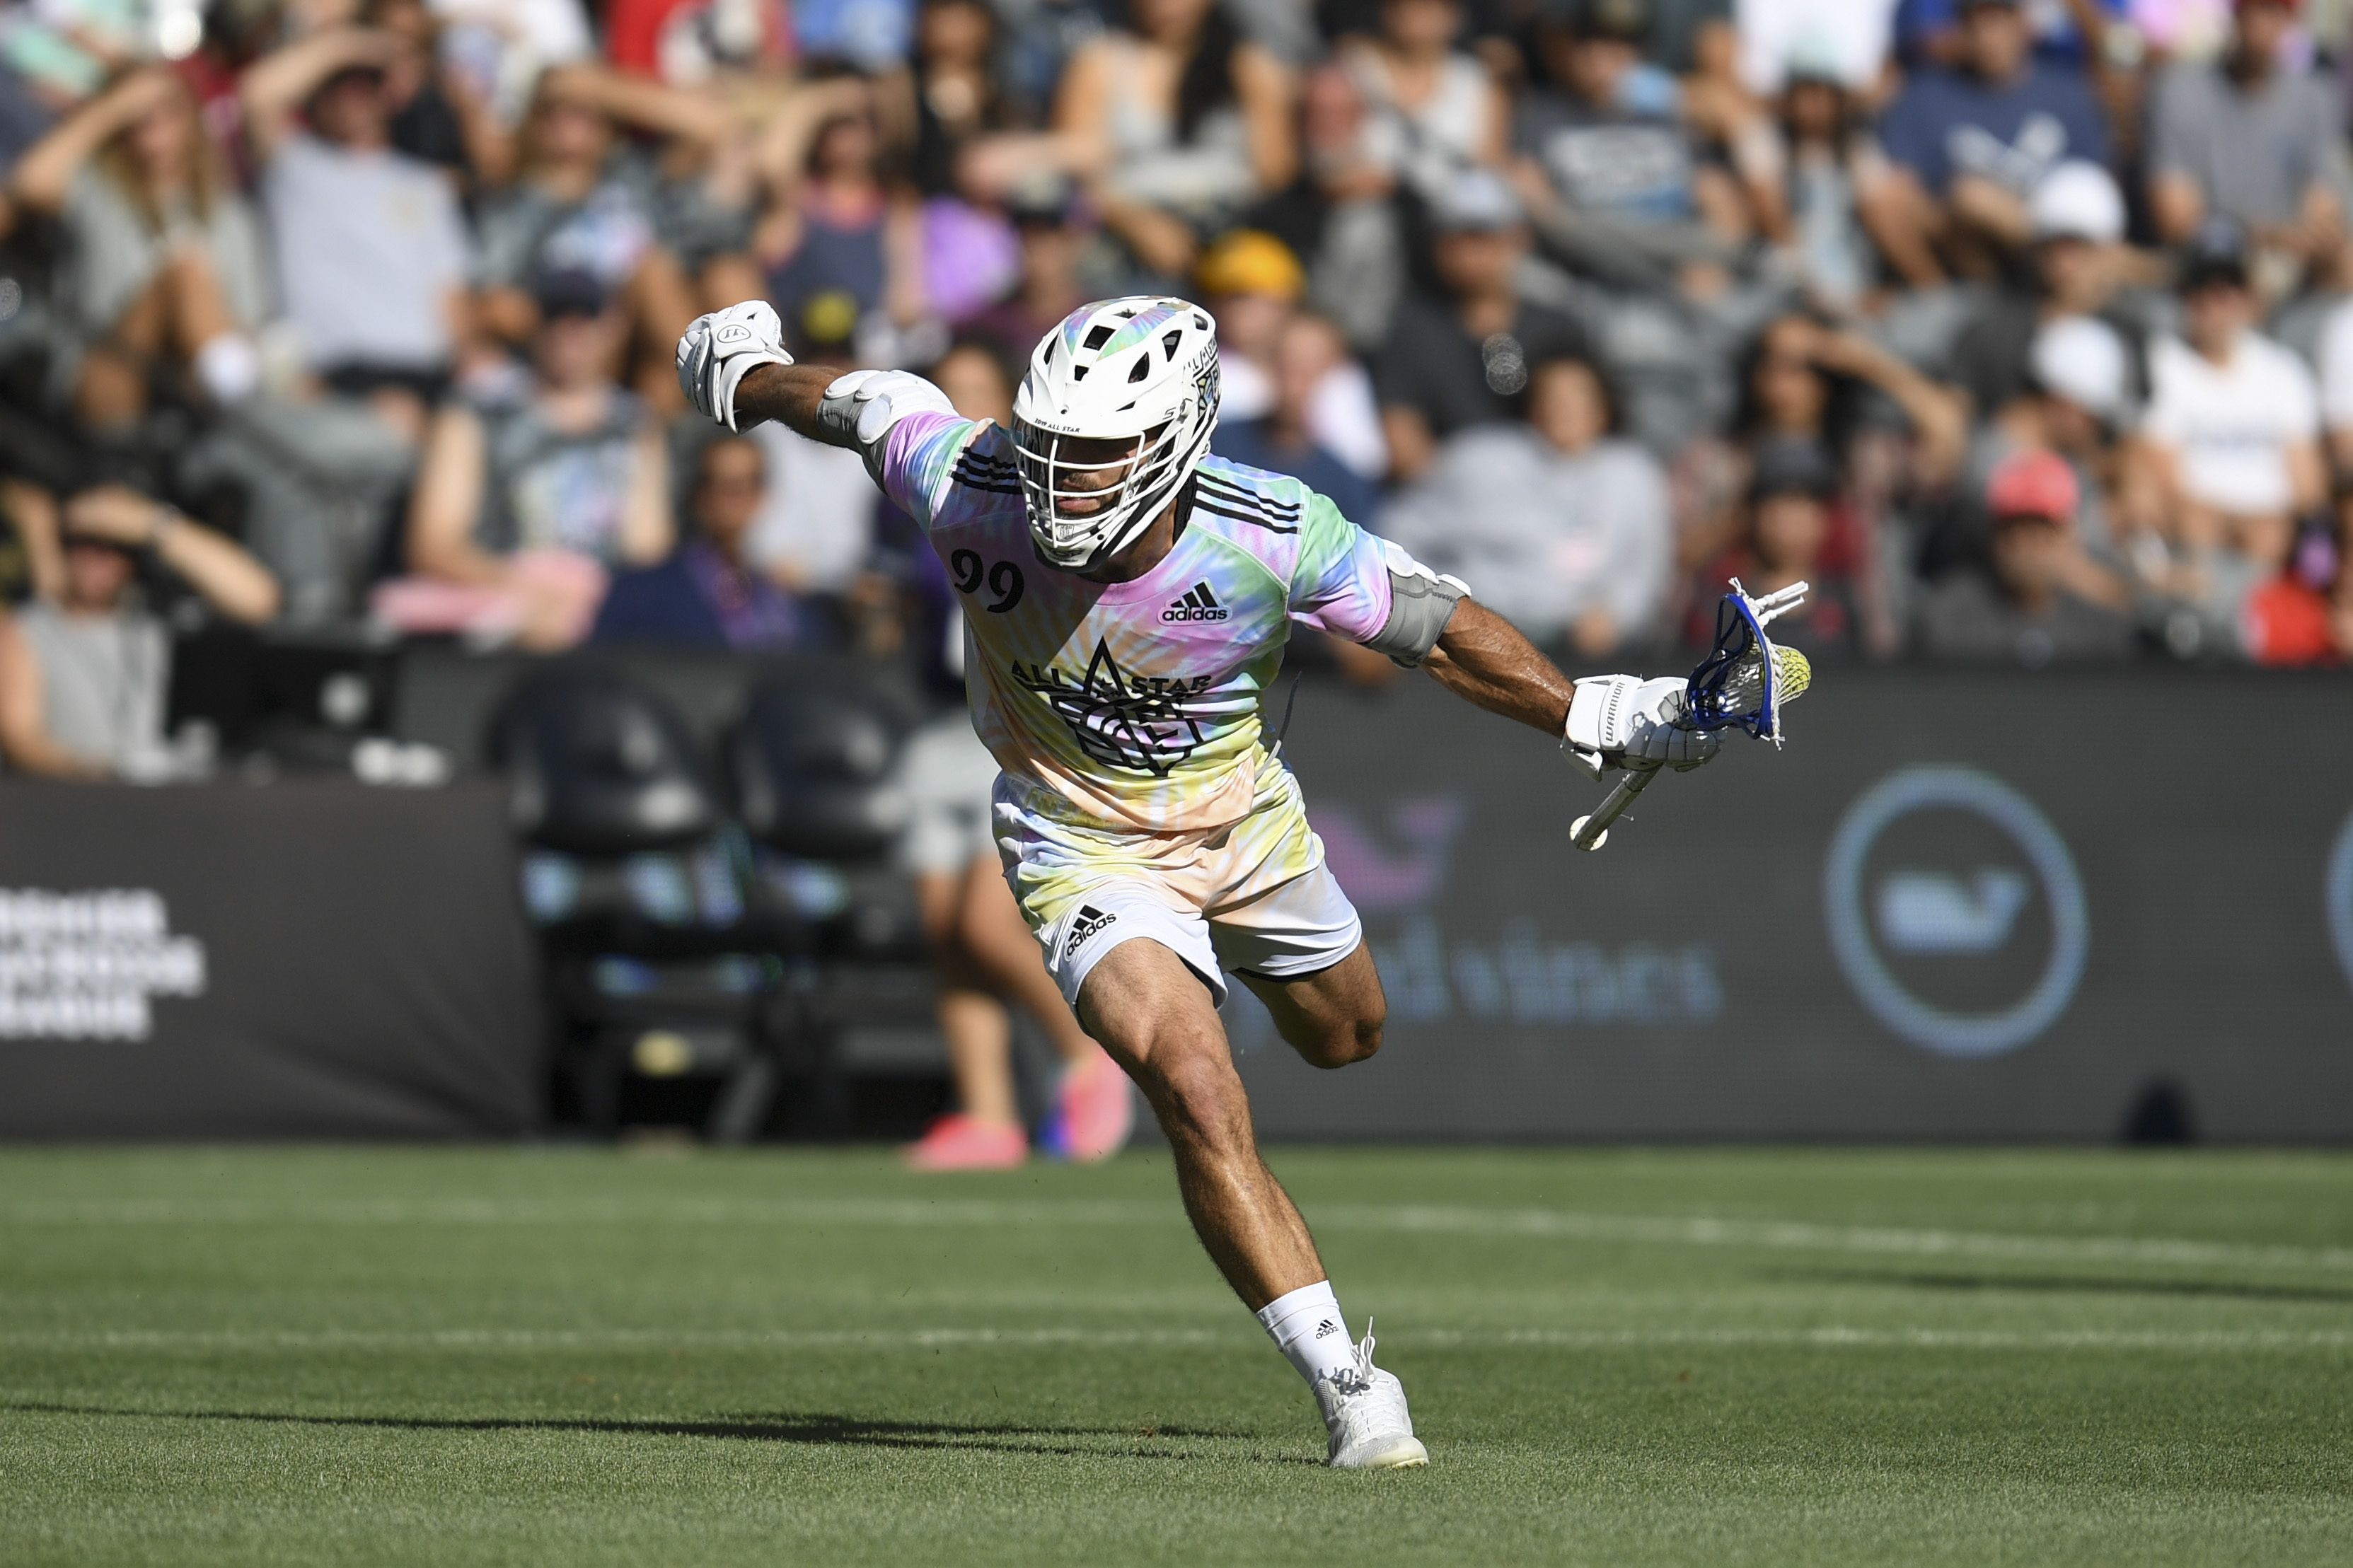 Lacrosse New Us Professional Men S Lacrosse League Looks To Break Through Mainstream Media With New Technology Cnn